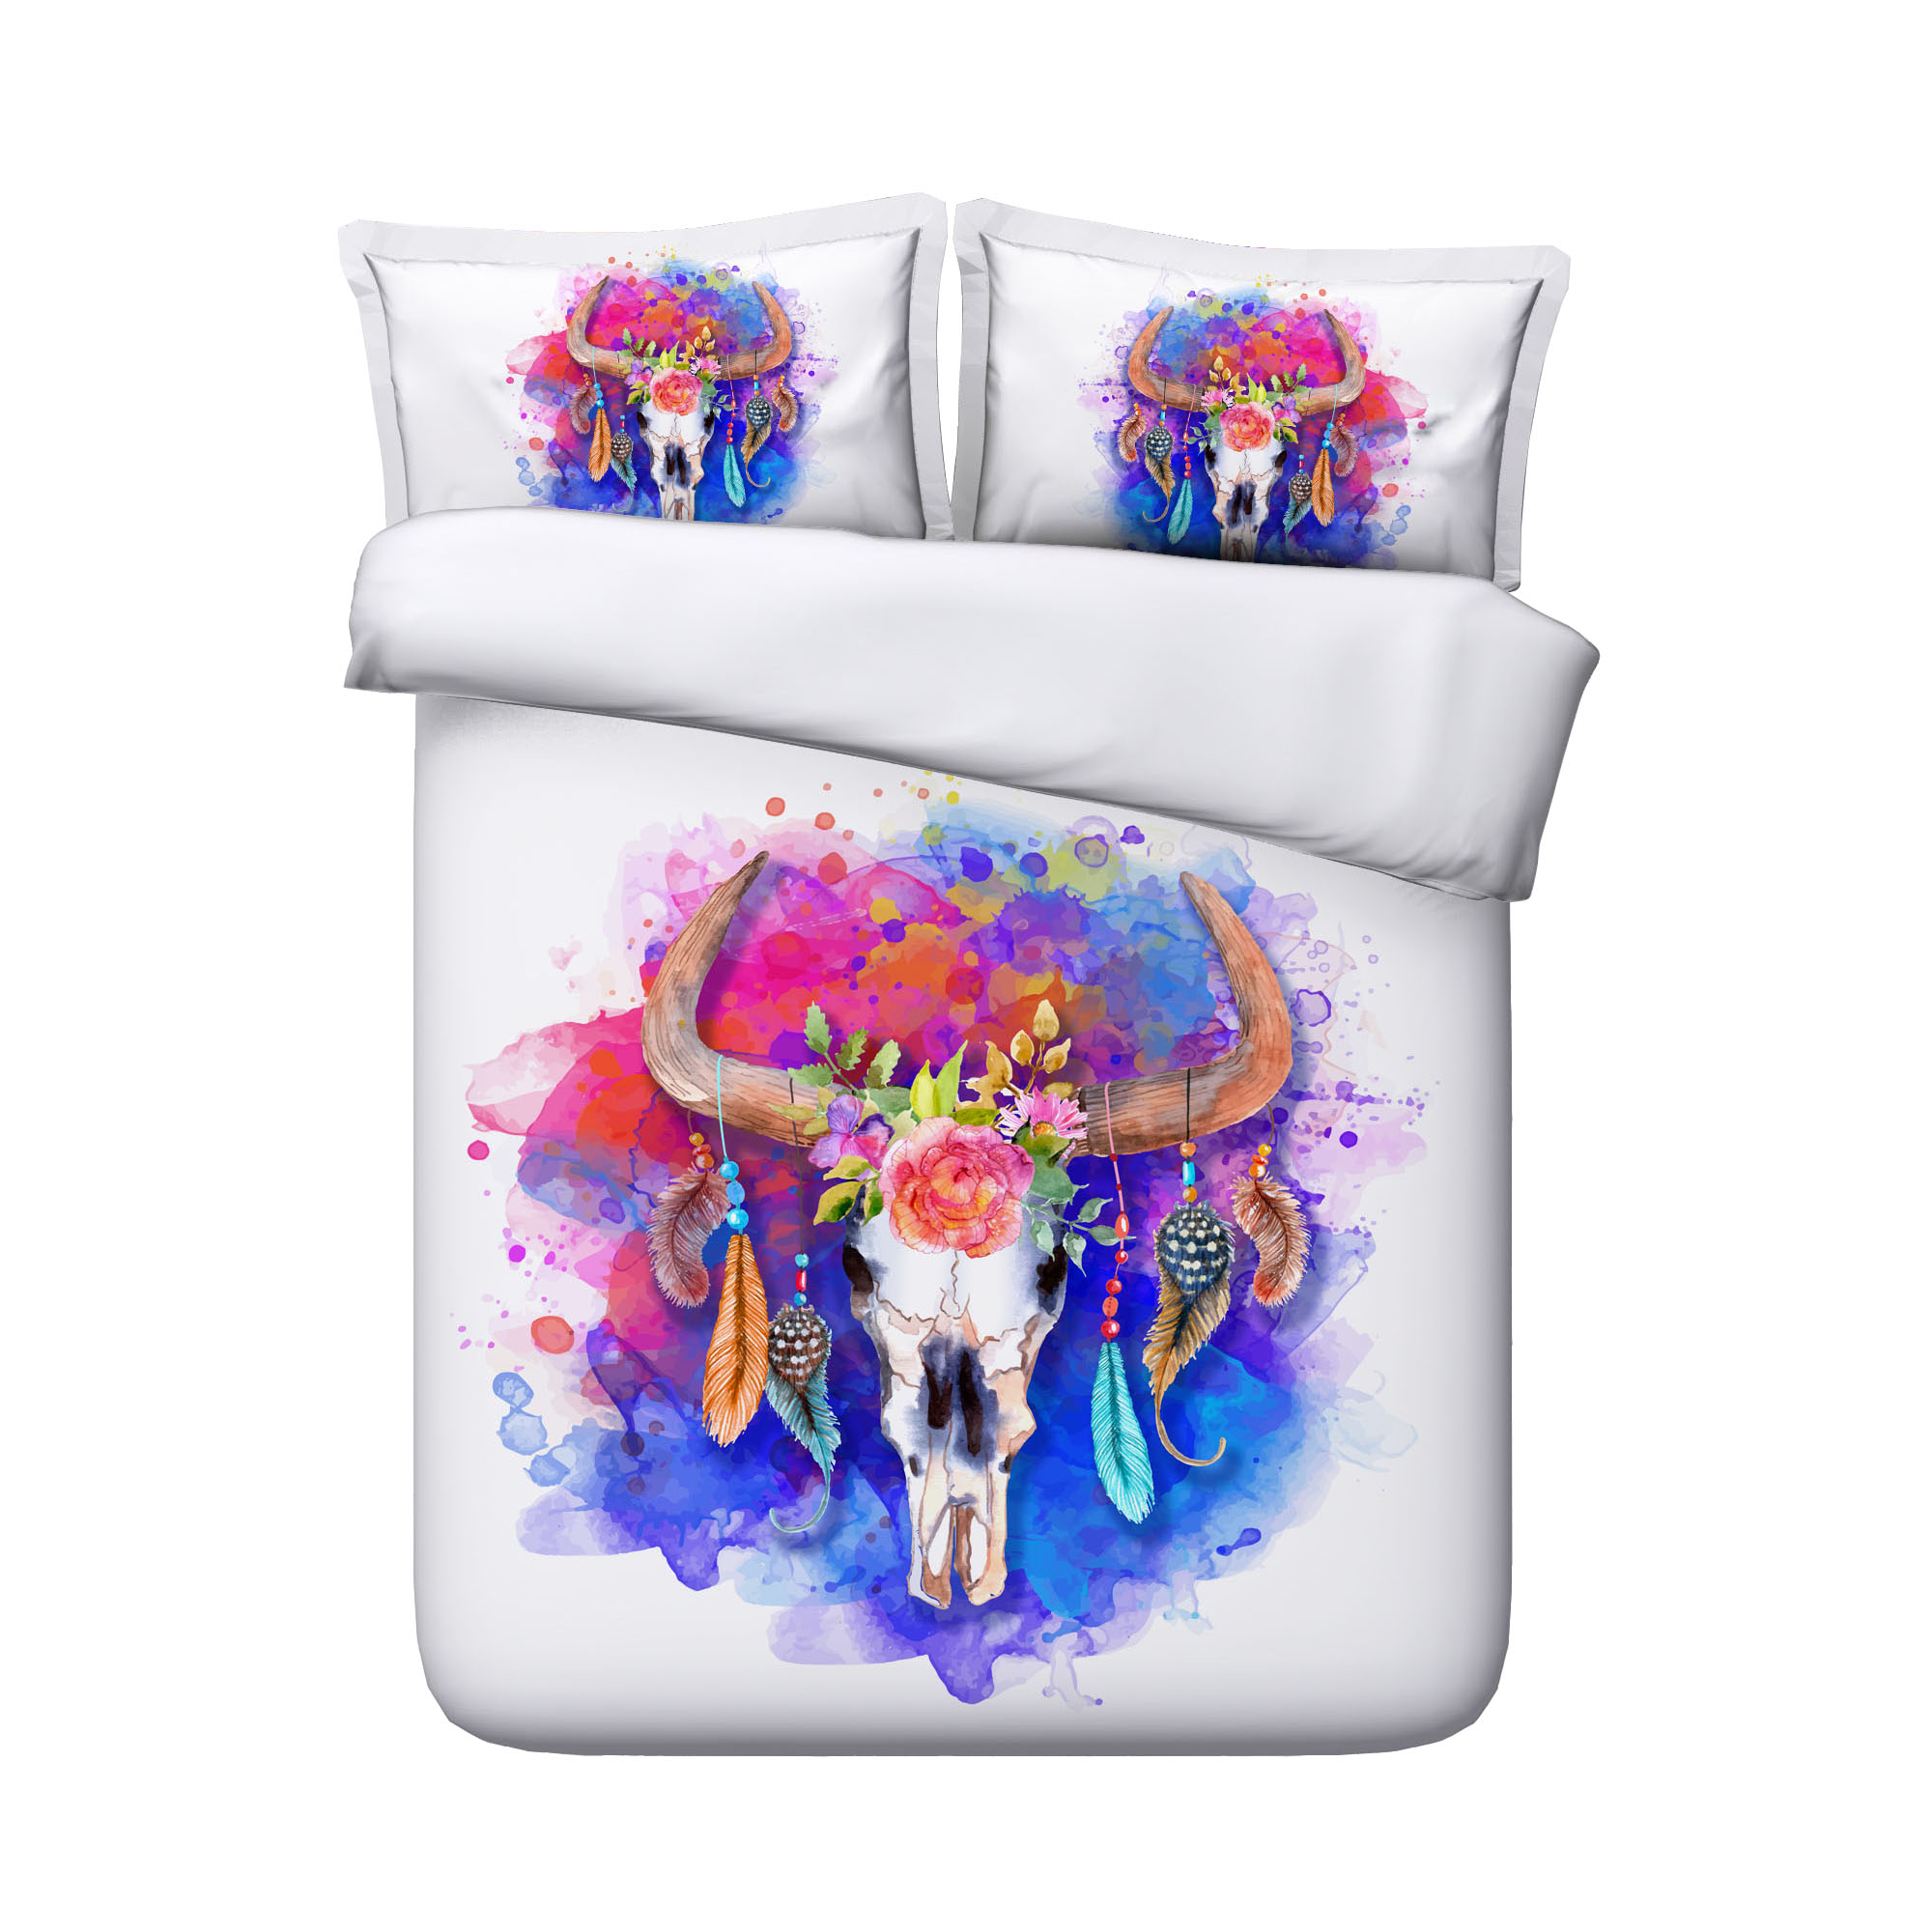 Boho Feather Duvet Cover Set Colorful Floral Sheep Skull Home